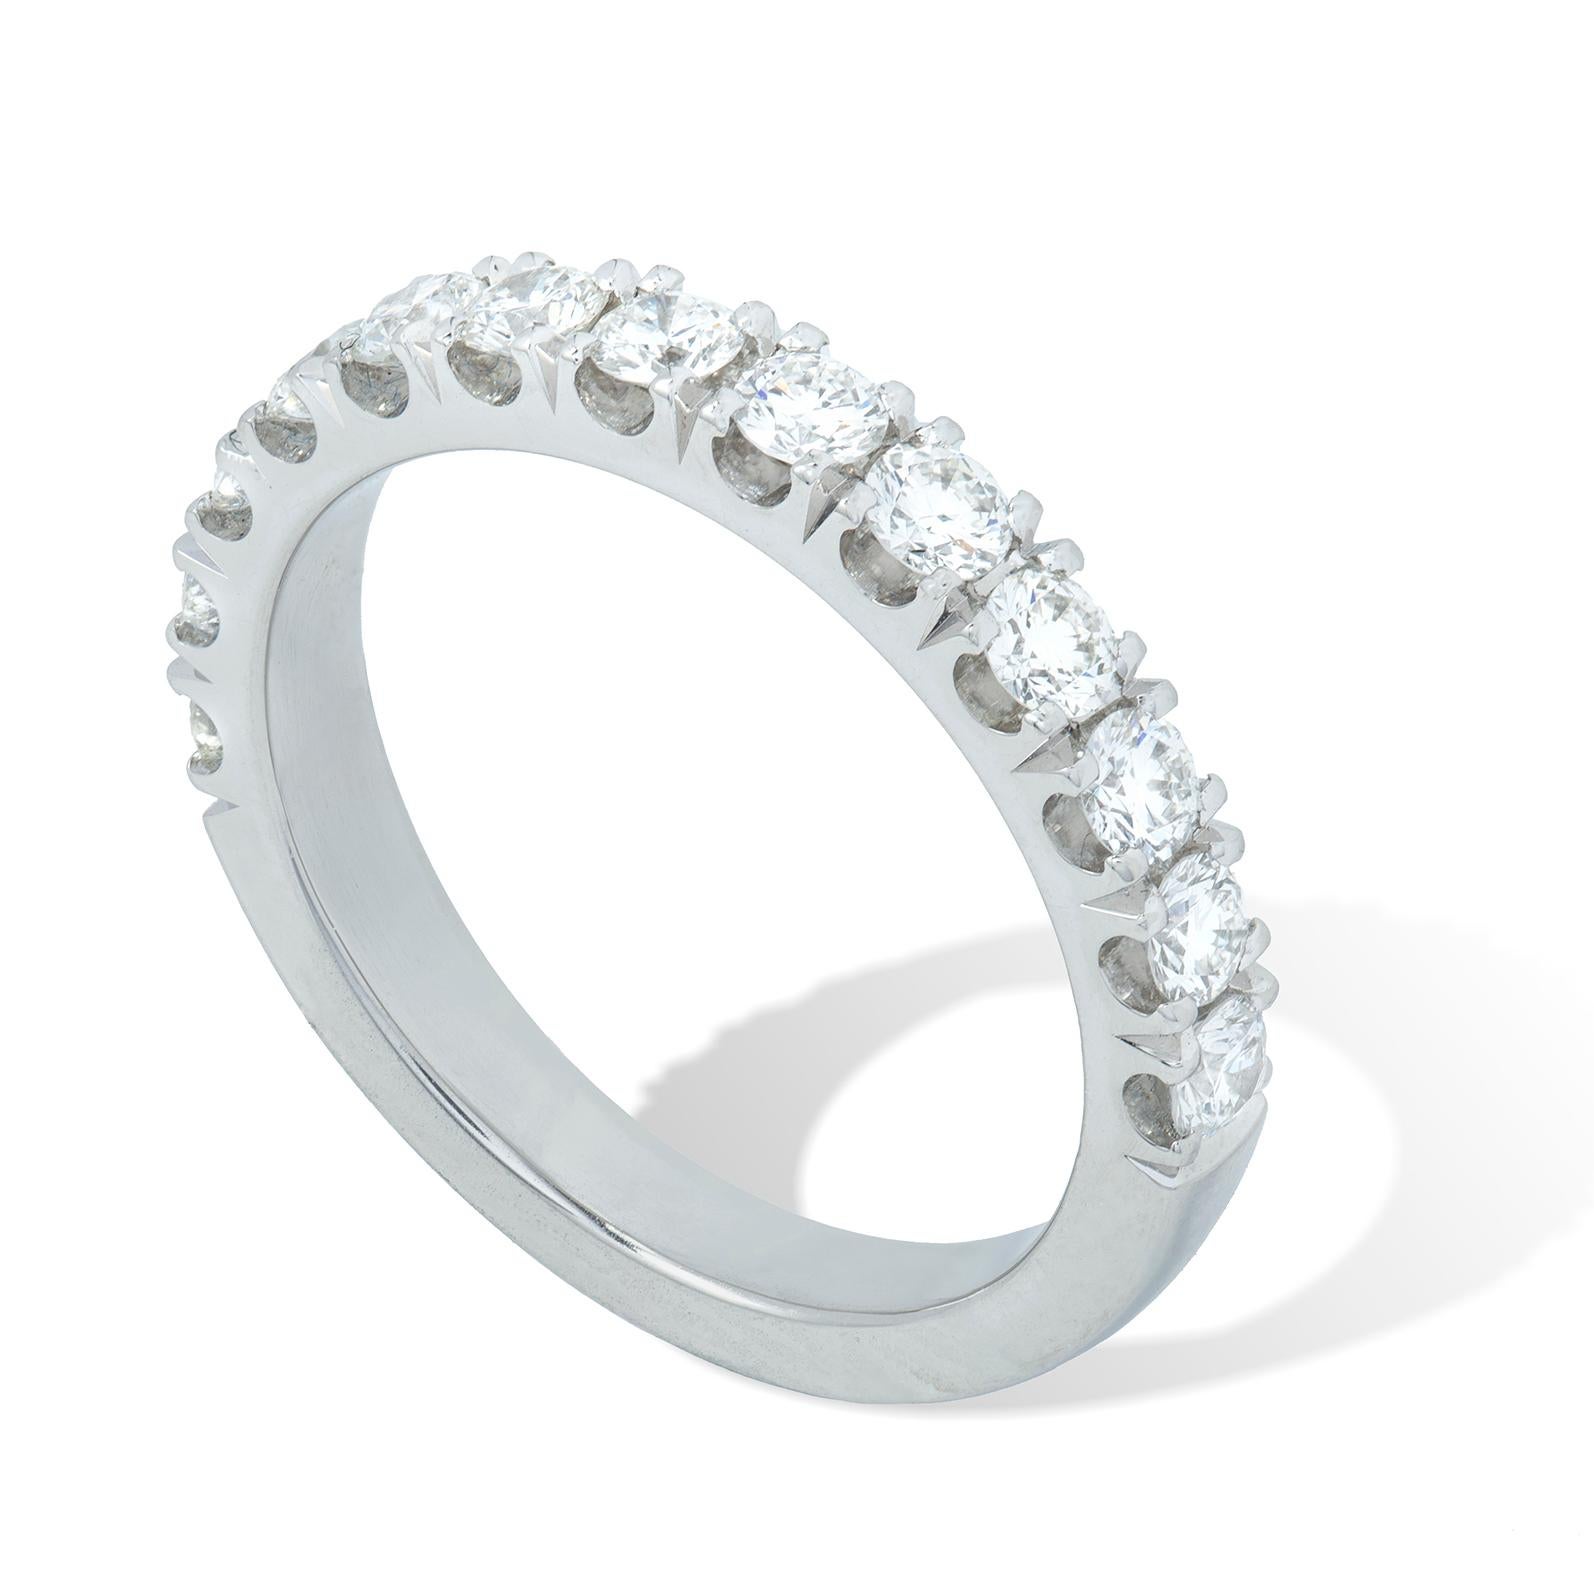 A diamond half eternity ring, set with thirteen round brilliant cut diamonds, weiging a total of 0.84 carats, all four claw set to a platinum mount, hallmarked platinum, London 2017, finger size L 1/2, gross weight 5.85 grams.

This ring is in